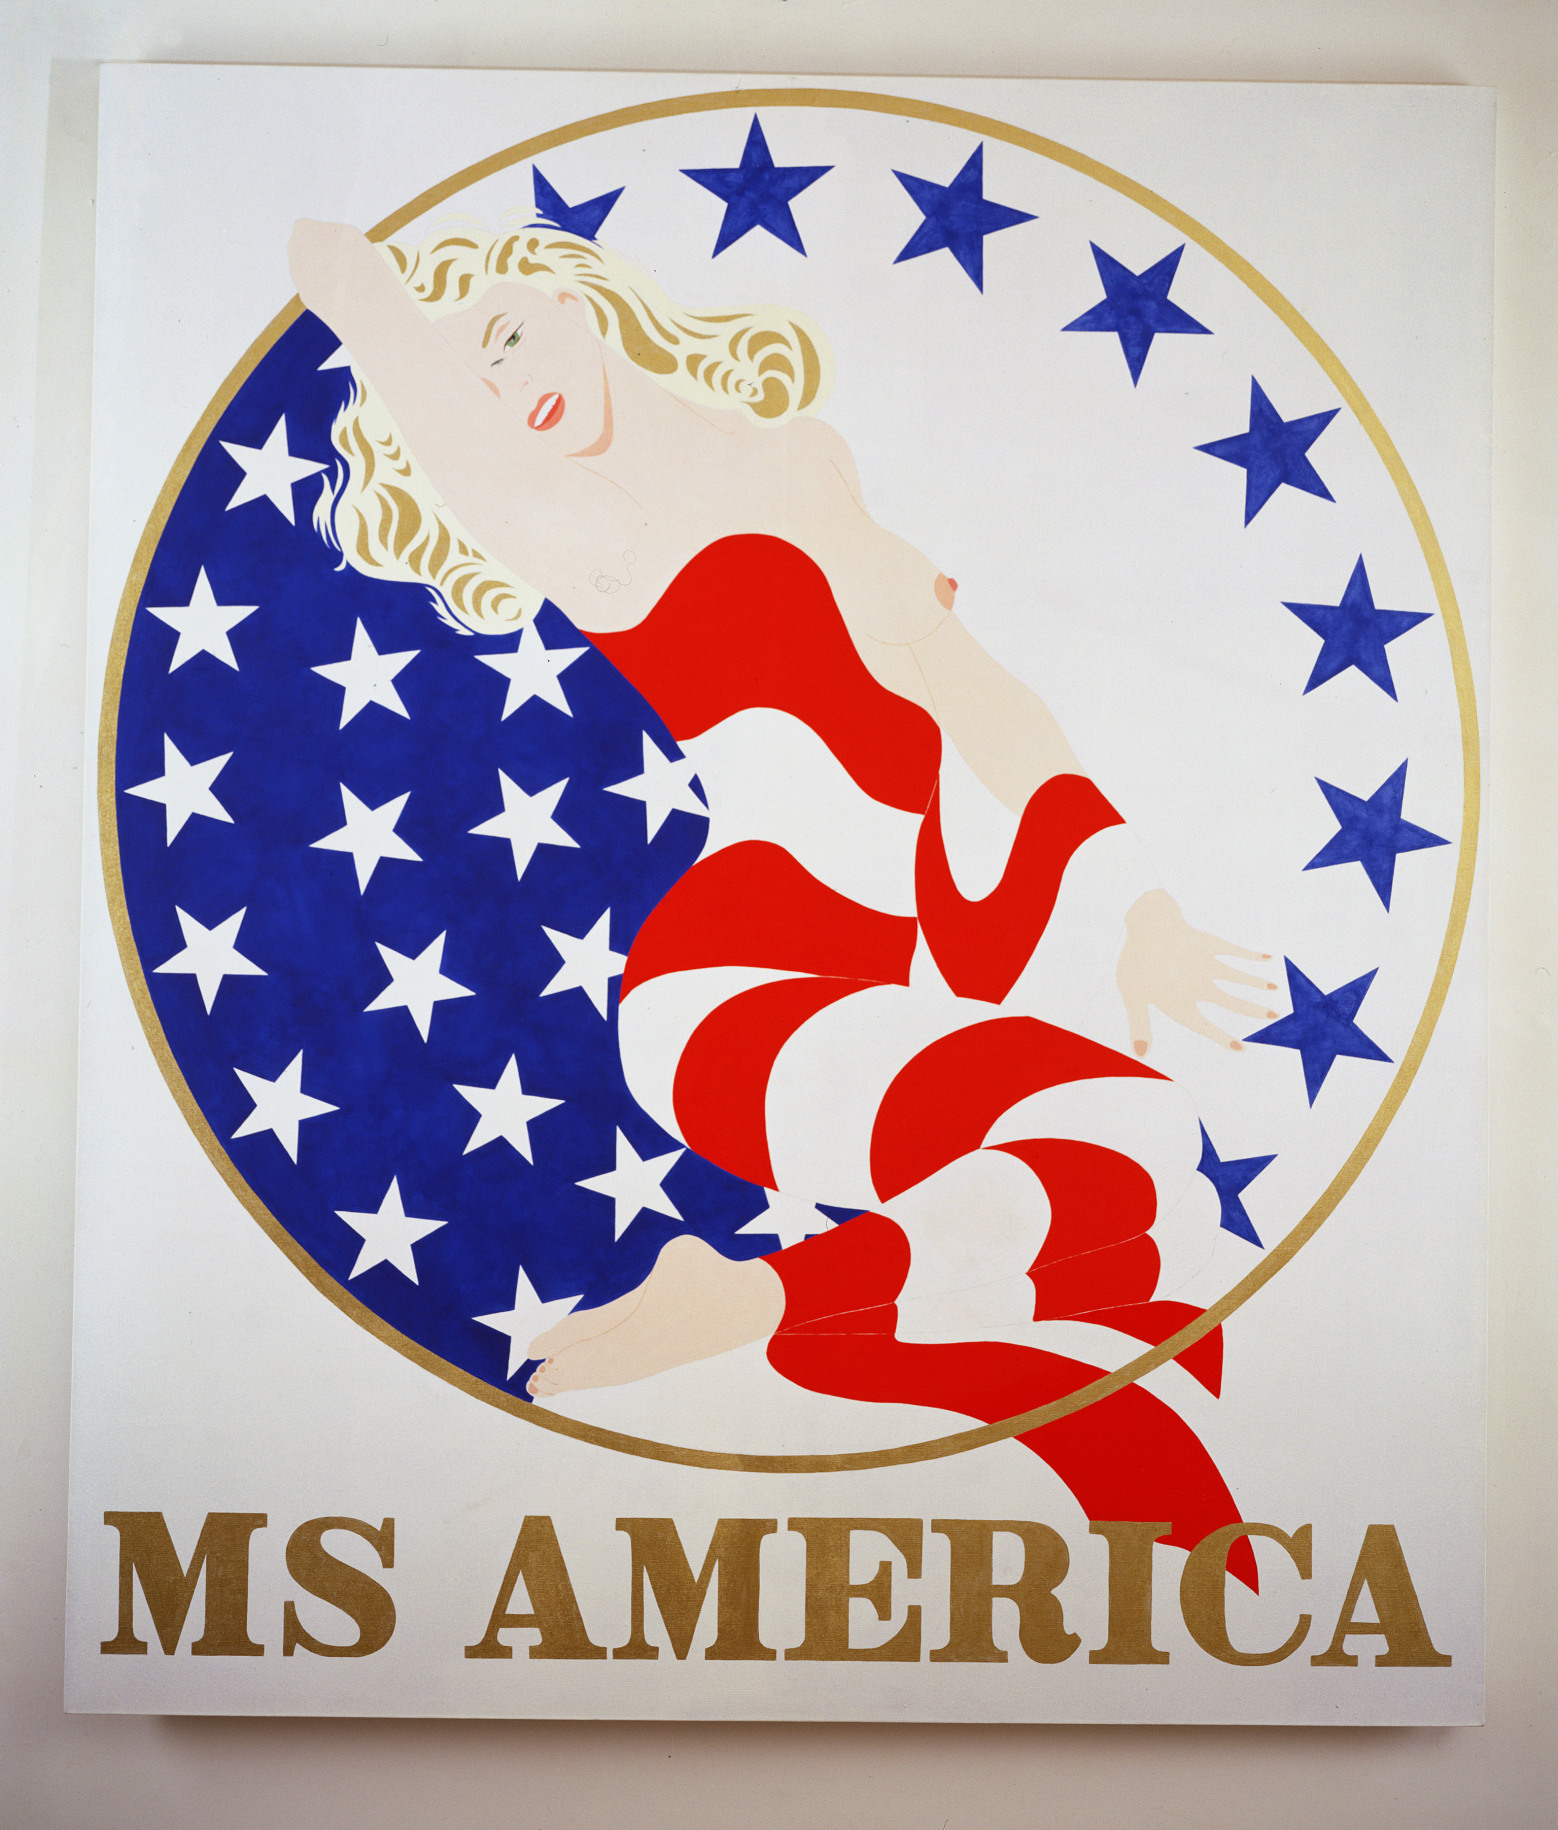 A 70 by 60 inch canvas with a white ground and the painting's title &quot;Ms America&quot; painted in gold letters across the bottom. Above the title is a white circle with a gold outline. in the circle is an image of Monroe draped in the red and white stripes of the American flag, one breast exposed. To the left of the image of Monroe the circle is painted blue, and filled with white stars. Nine blue stars run down the inner right edge of the star.